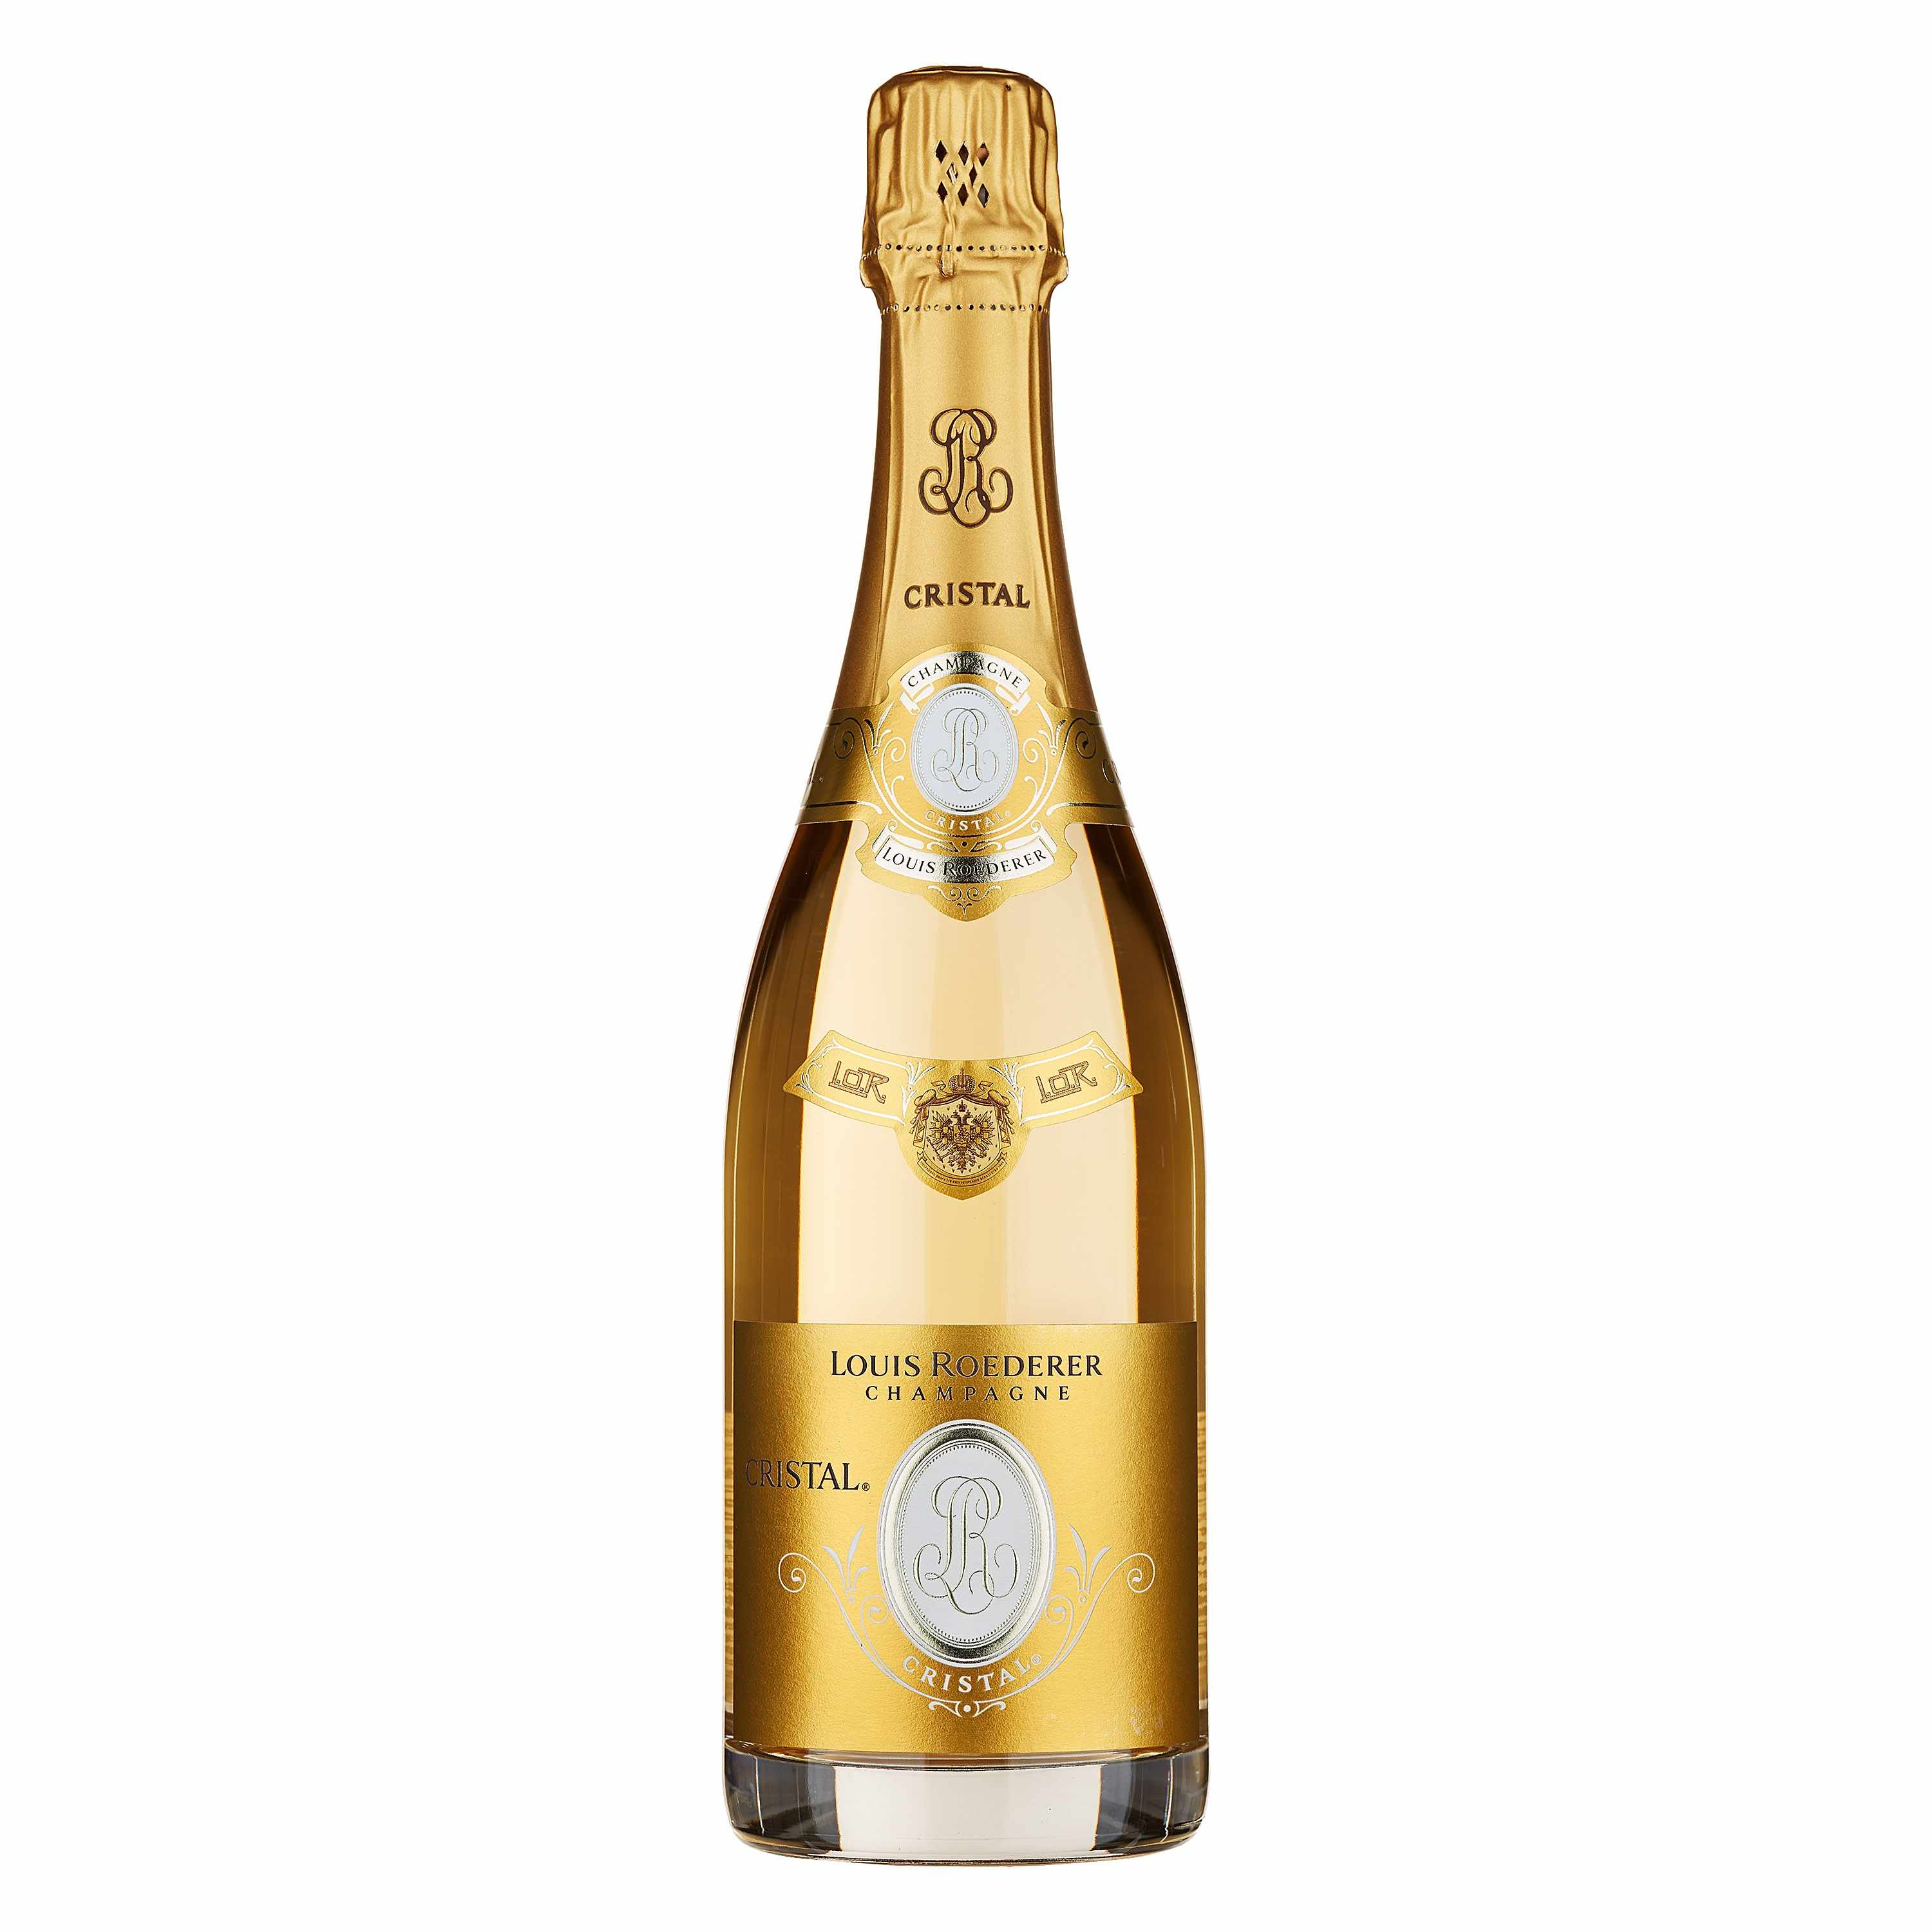 CHAMPAGNE CRISTAL 2015 LOUIS ROEDERER